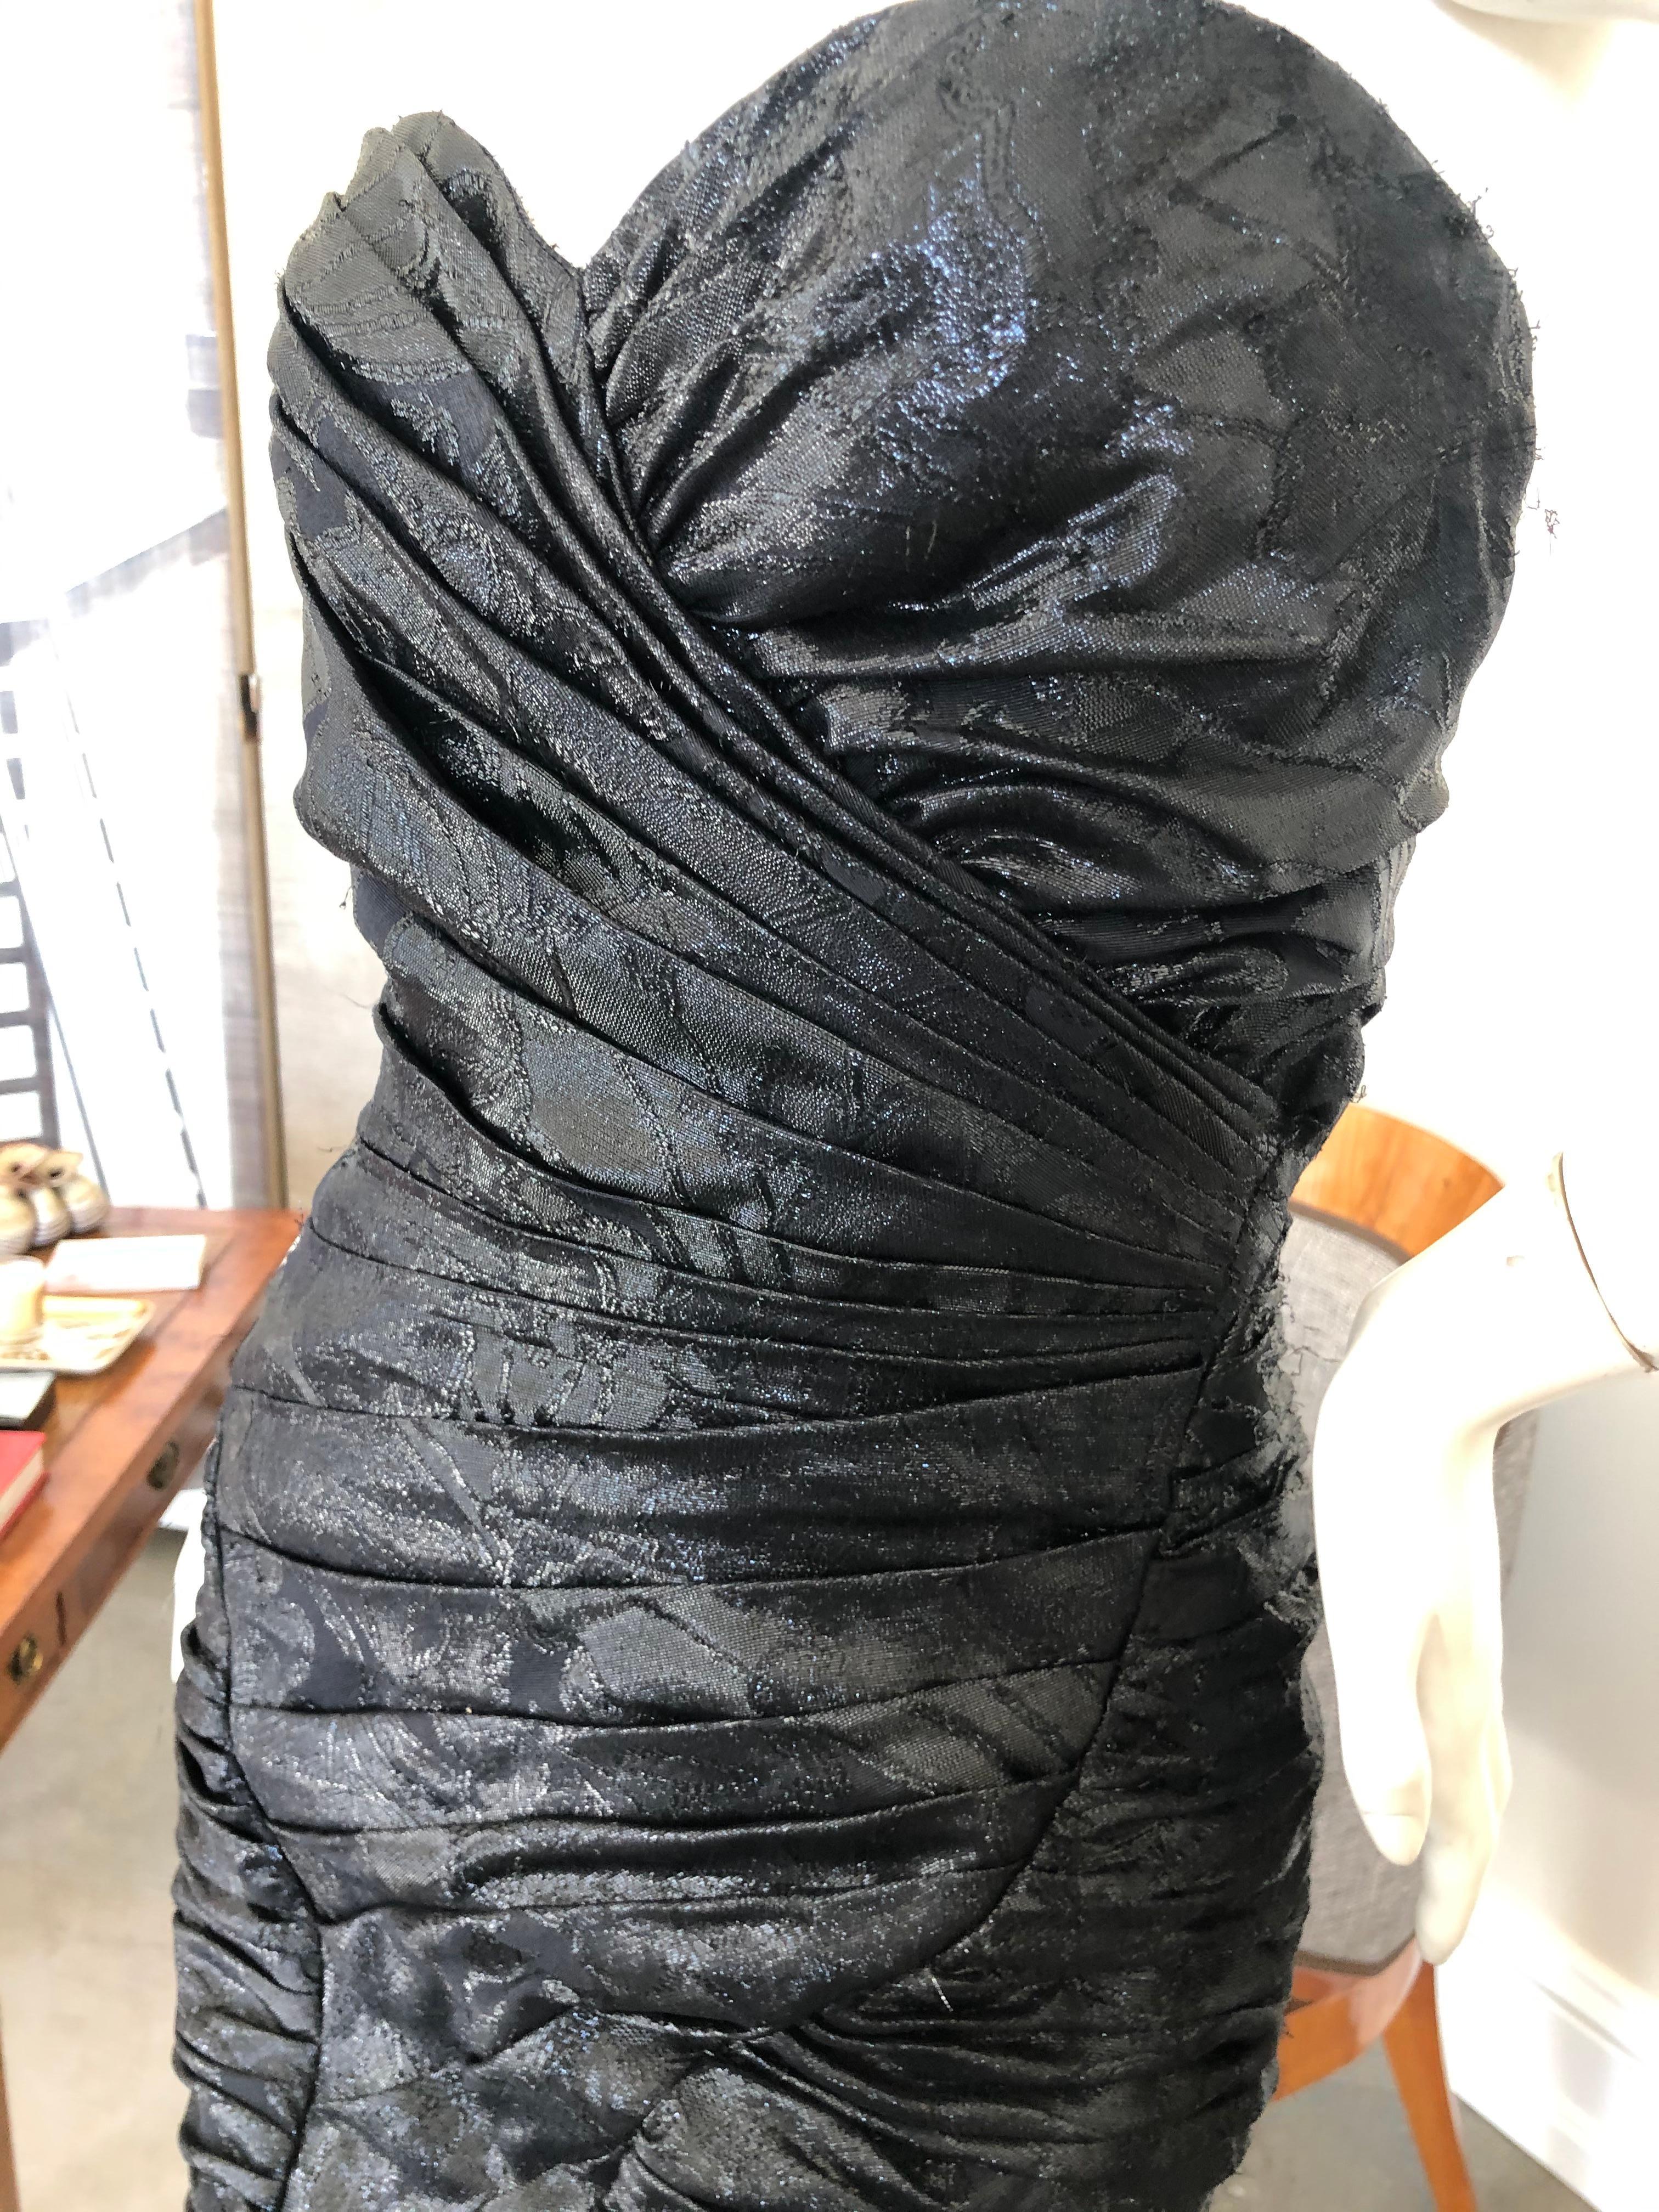 Emanuel Ungaro 1980's Vintage Strapless Black Hourglass Figure Mermaid Dress In Excellent Condition For Sale In Cloverdale, CA